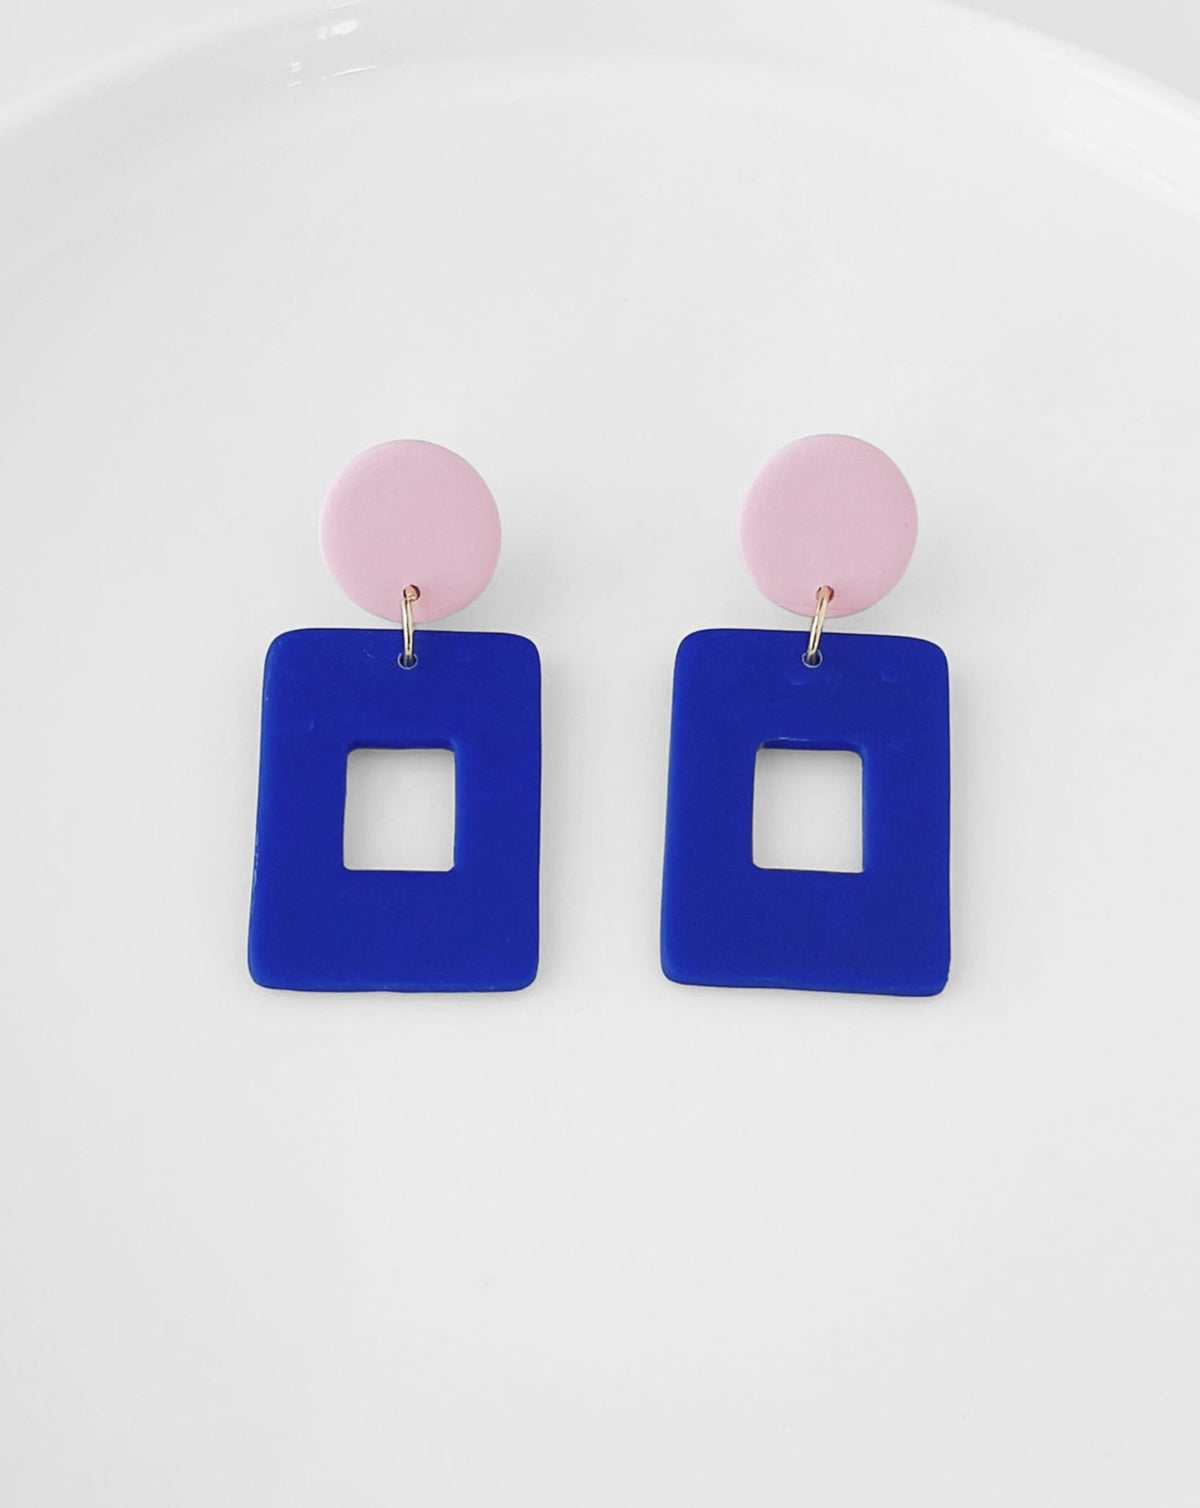 close-up of Muna earrings in Hue Blue color.